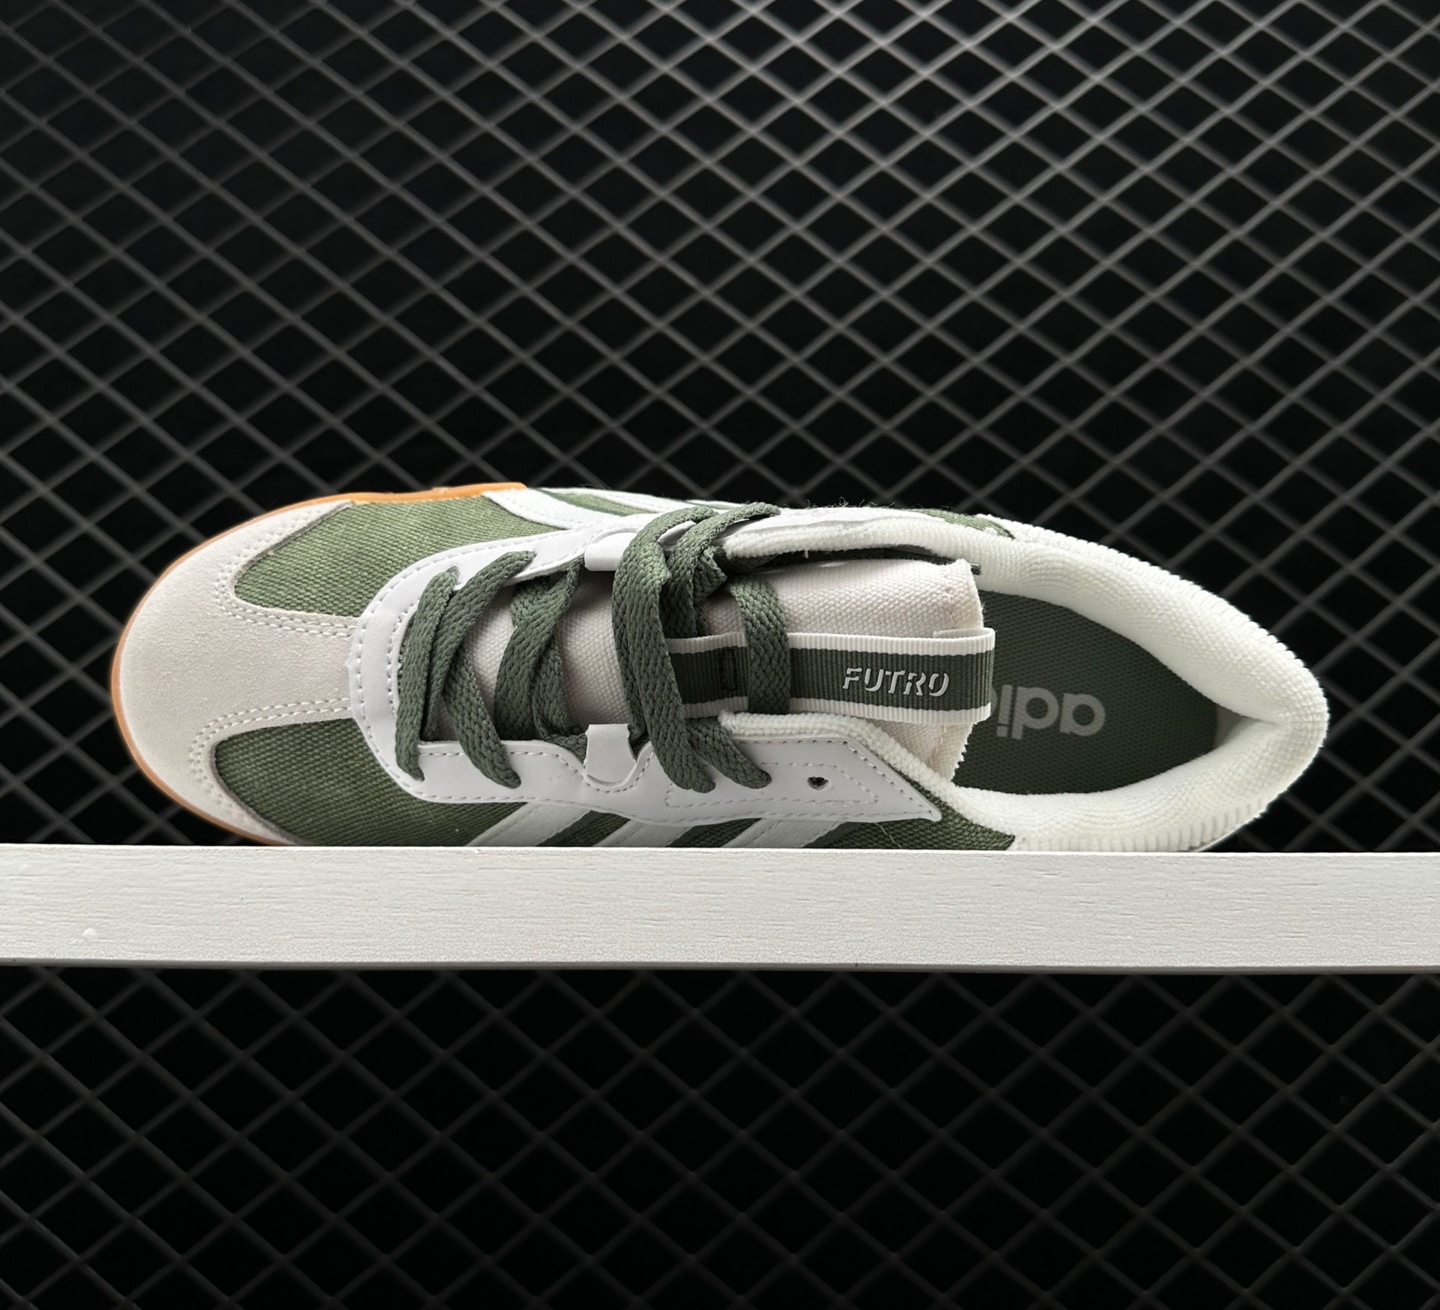 Adidas Neo Futro Mixr Lifestyle Shoes 'White Olive Green' IE2119 - Classy and Sporty Footwear